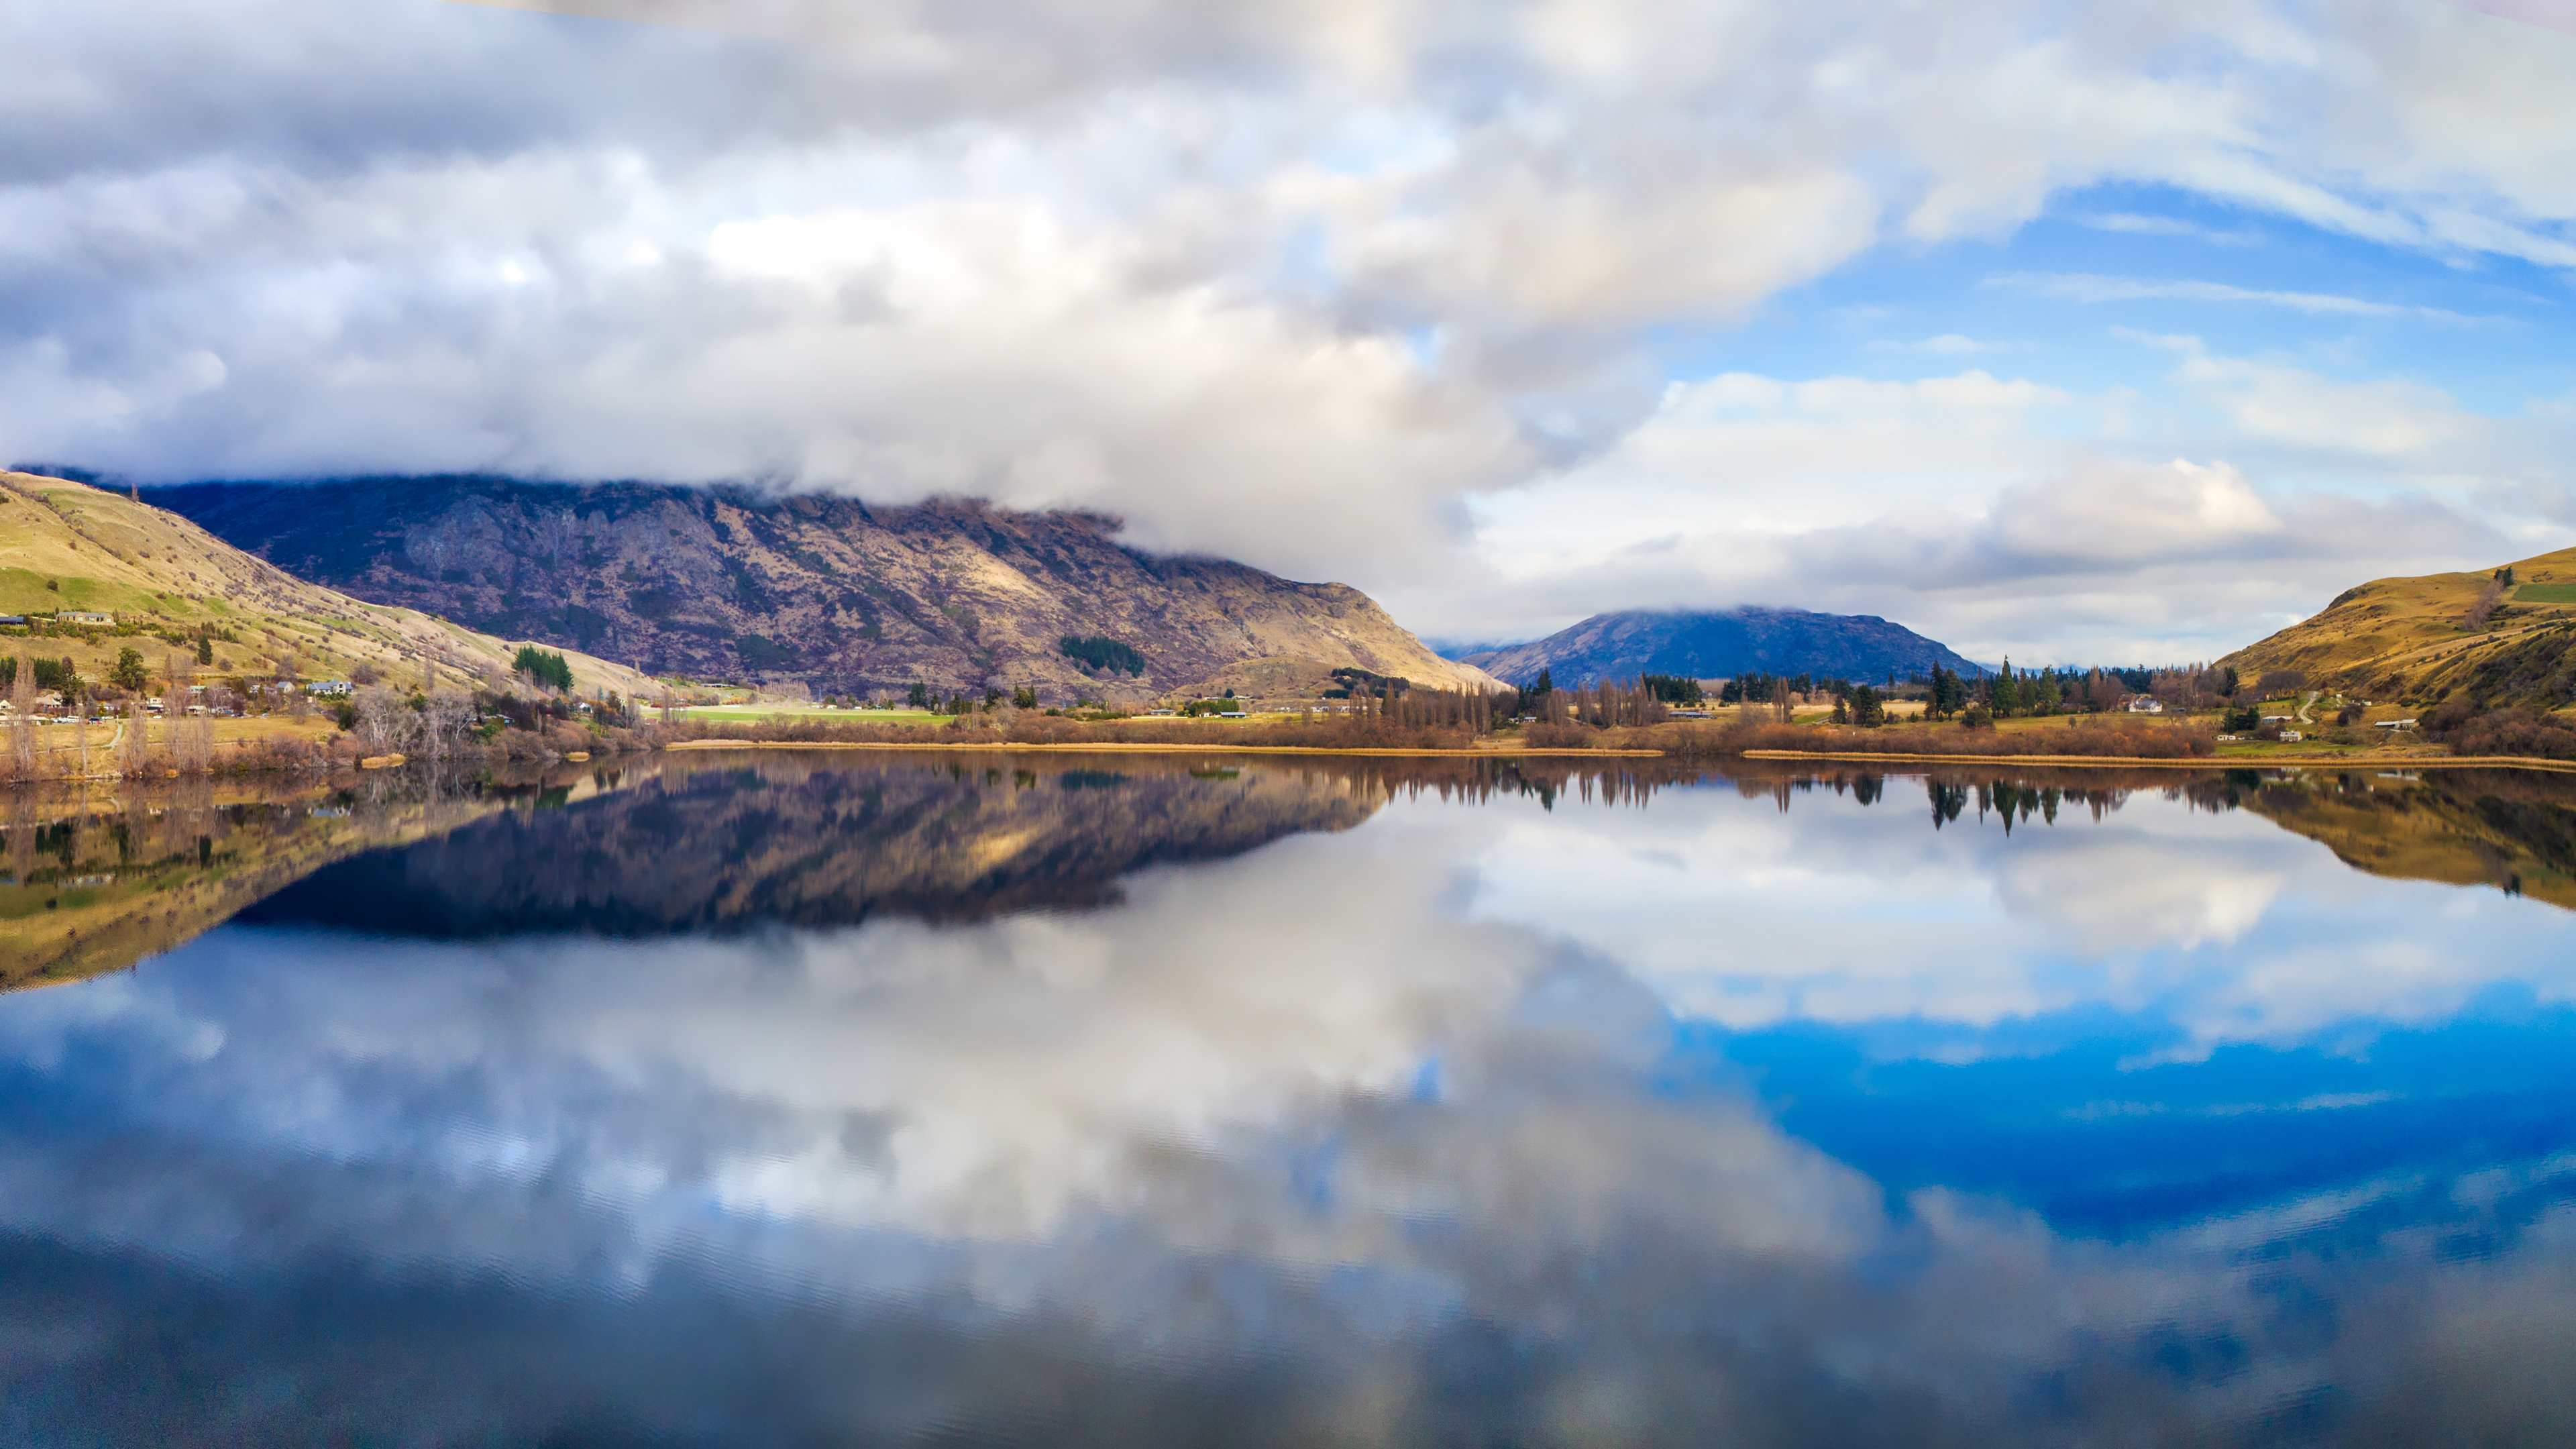 General 3840x2160 landscape 4K New Zealand nature water reflection clouds sky mountains